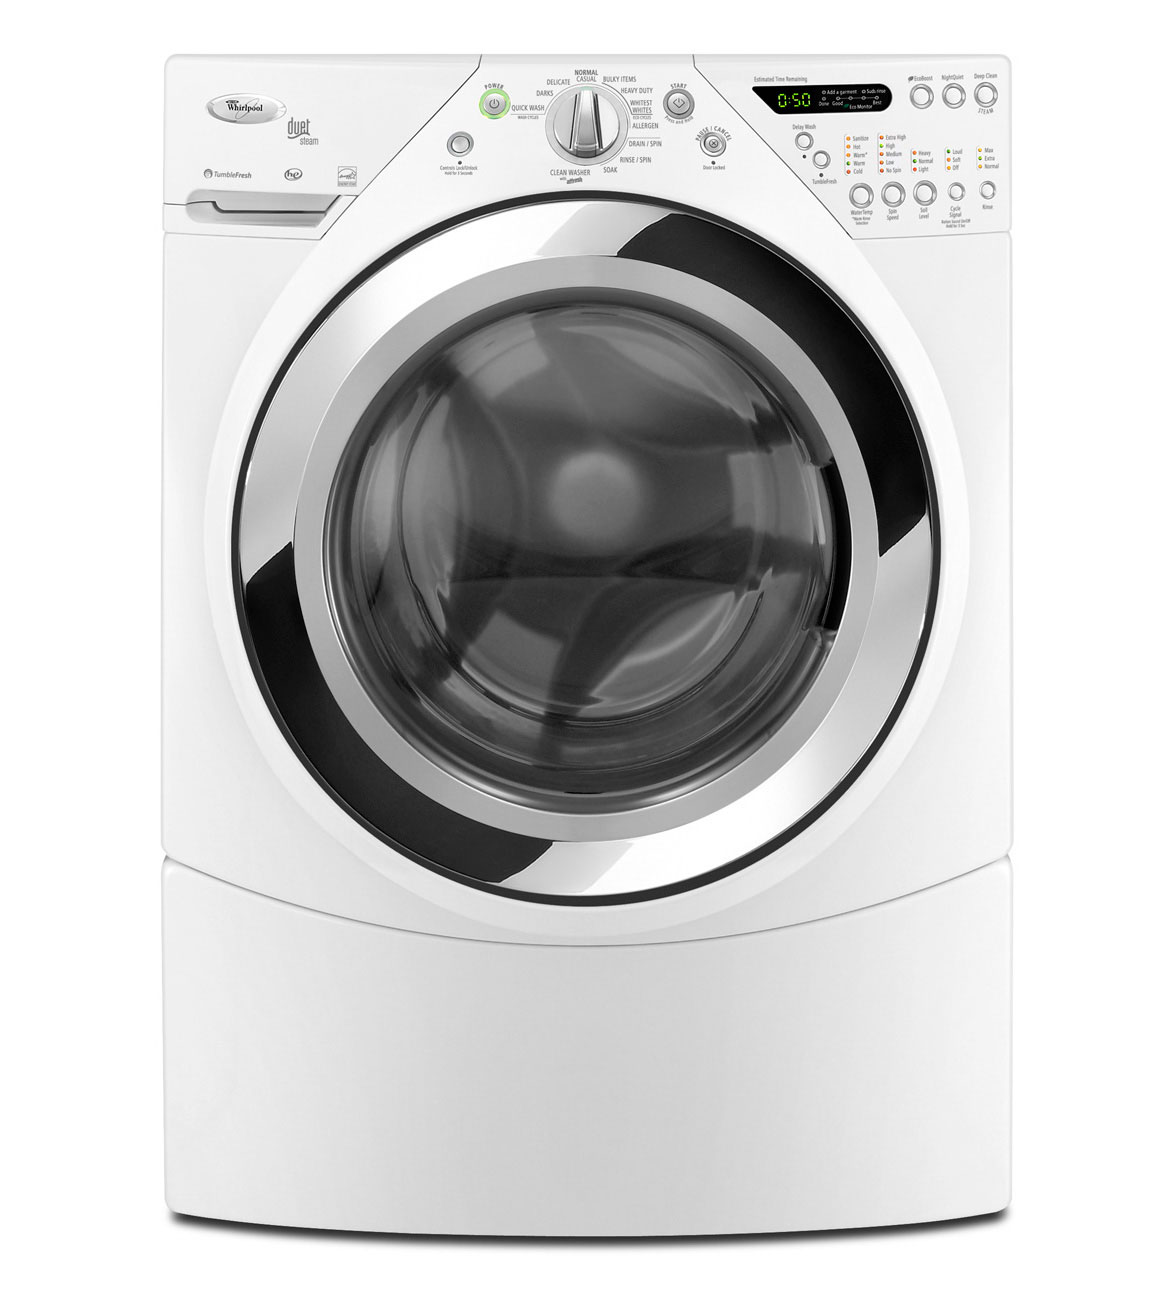 Whirlpool Duet 3.9 cu ft High-Efficiency Front-Load Washer (White) ENERGY STAR